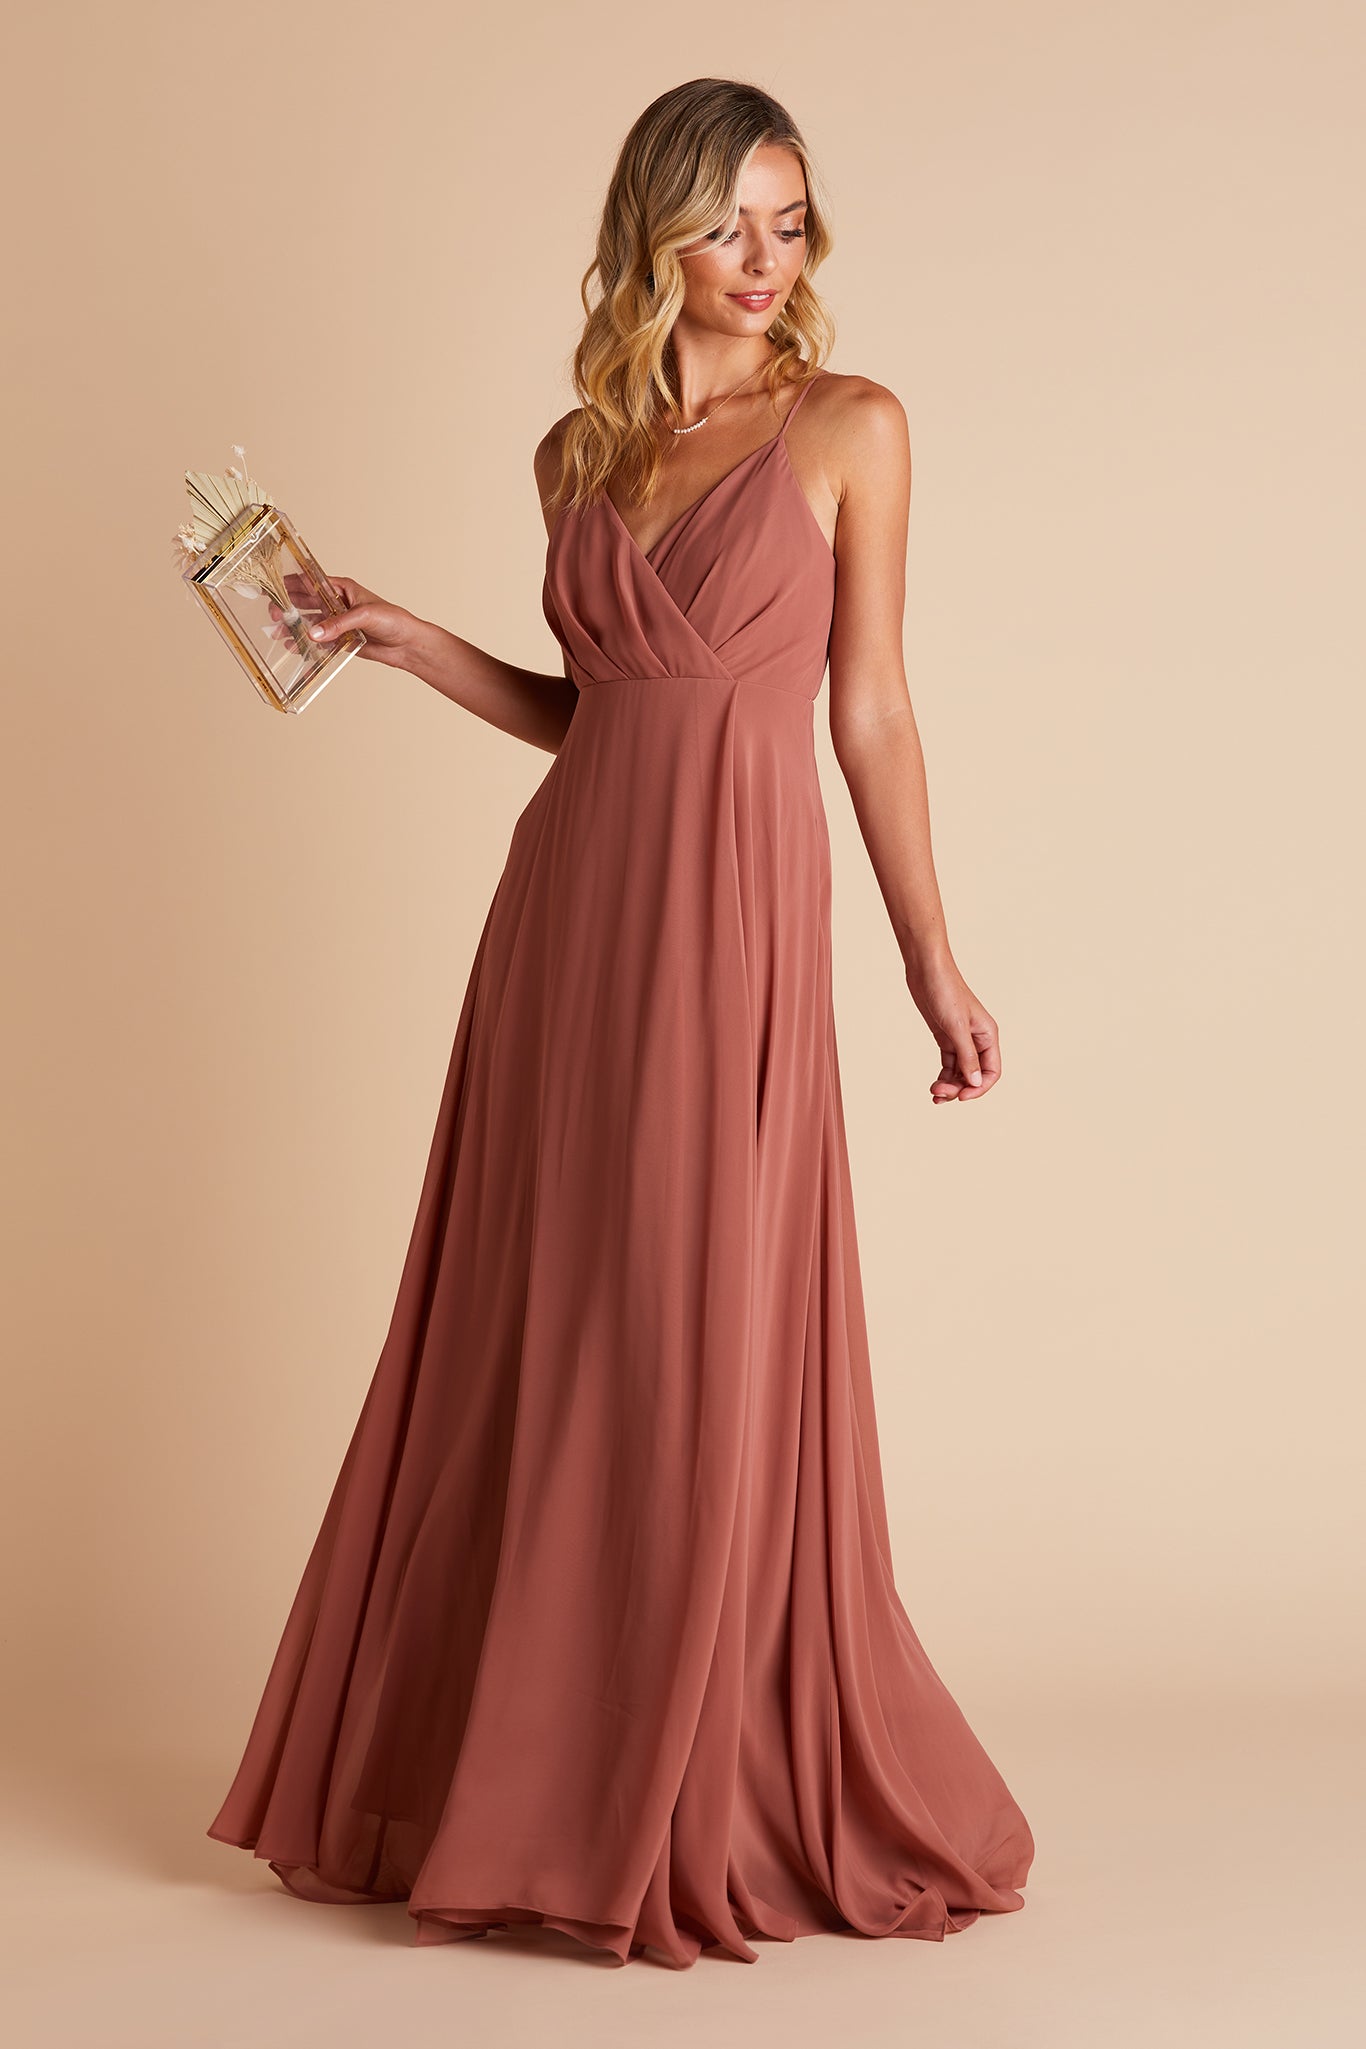 Kaia bridesmaids dress in desert rose chiffon by Birdy Grey, front view